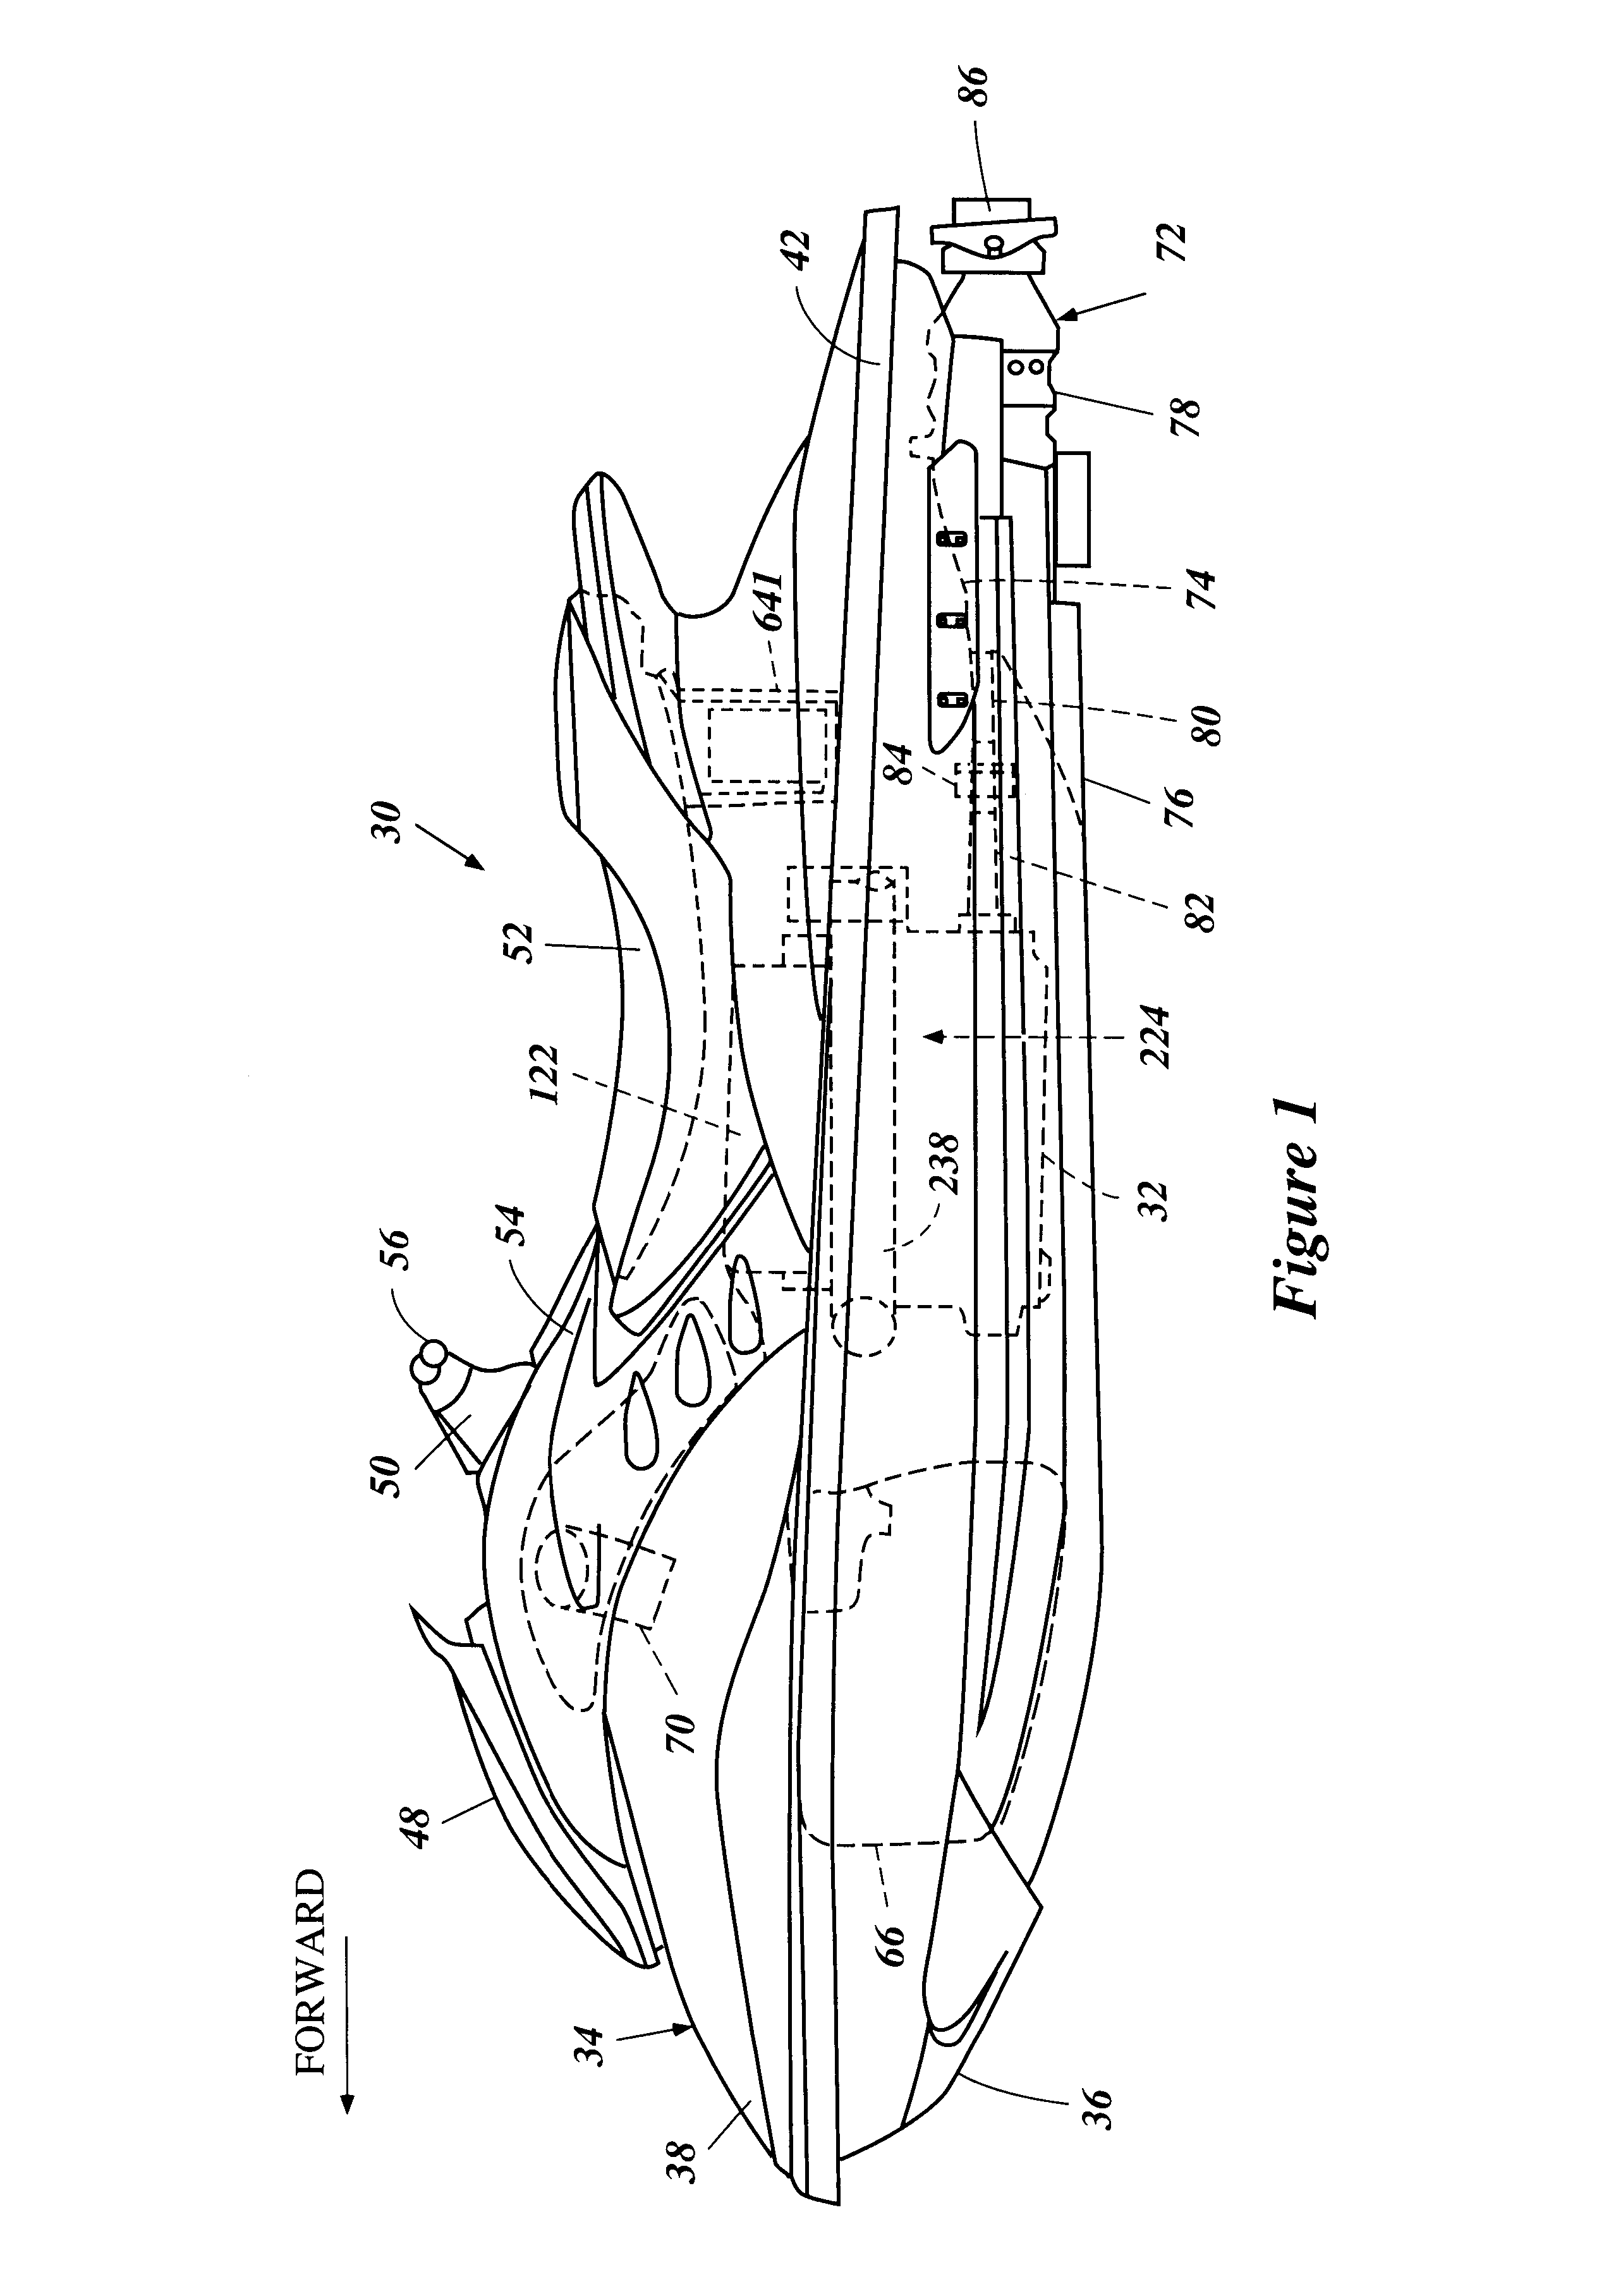 Induction system for 4-cycle engine of small watercraft